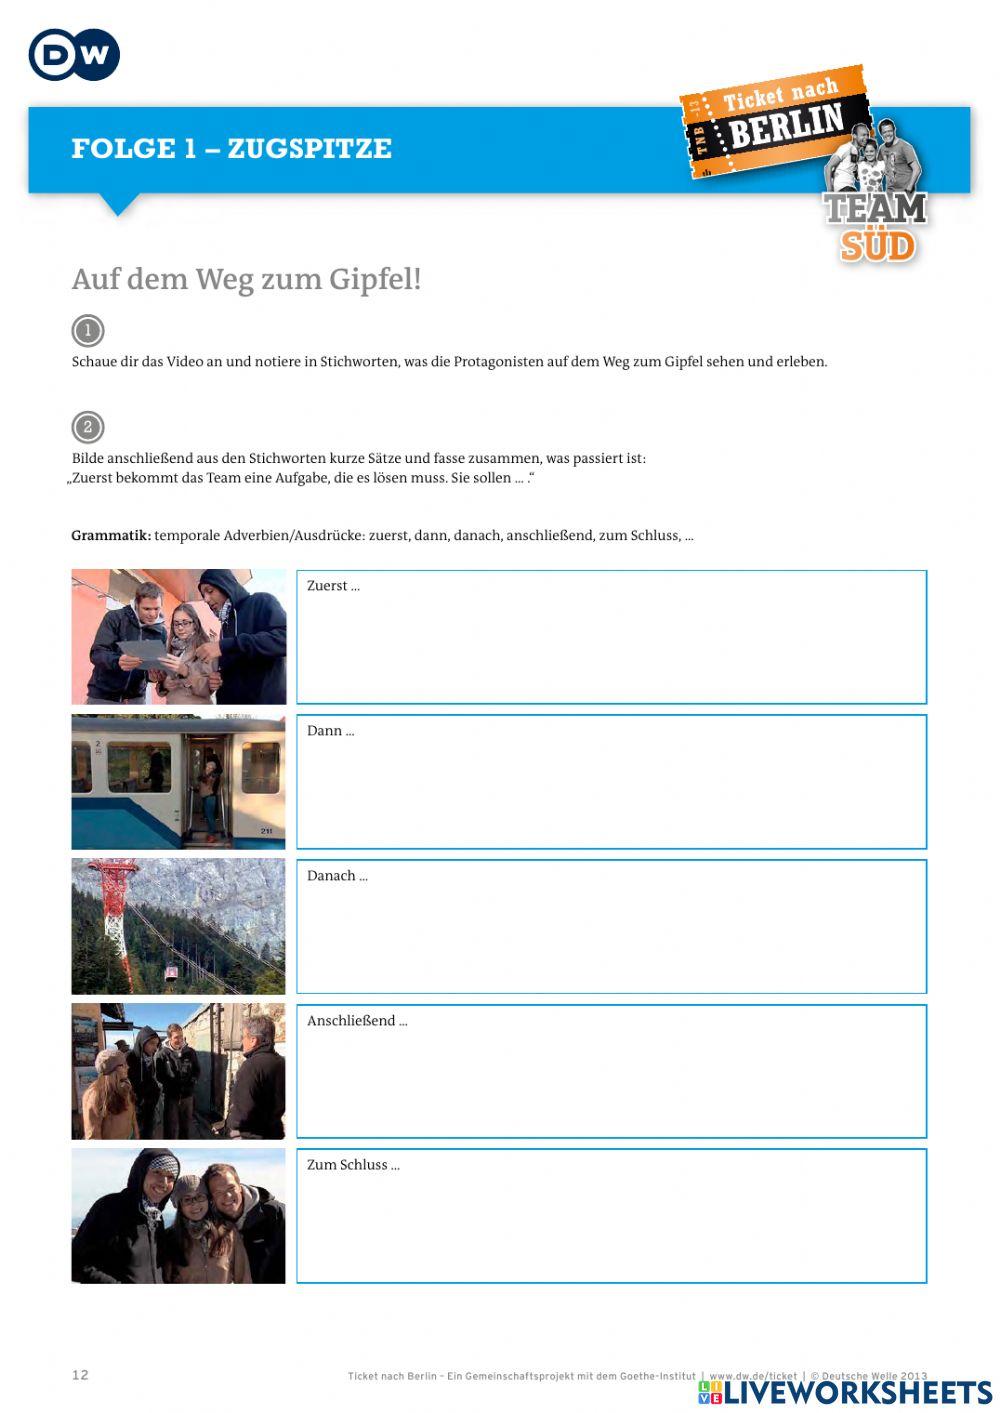 Ticket-nach-Berlin-AB-1 online exercise for | Live Worksheets